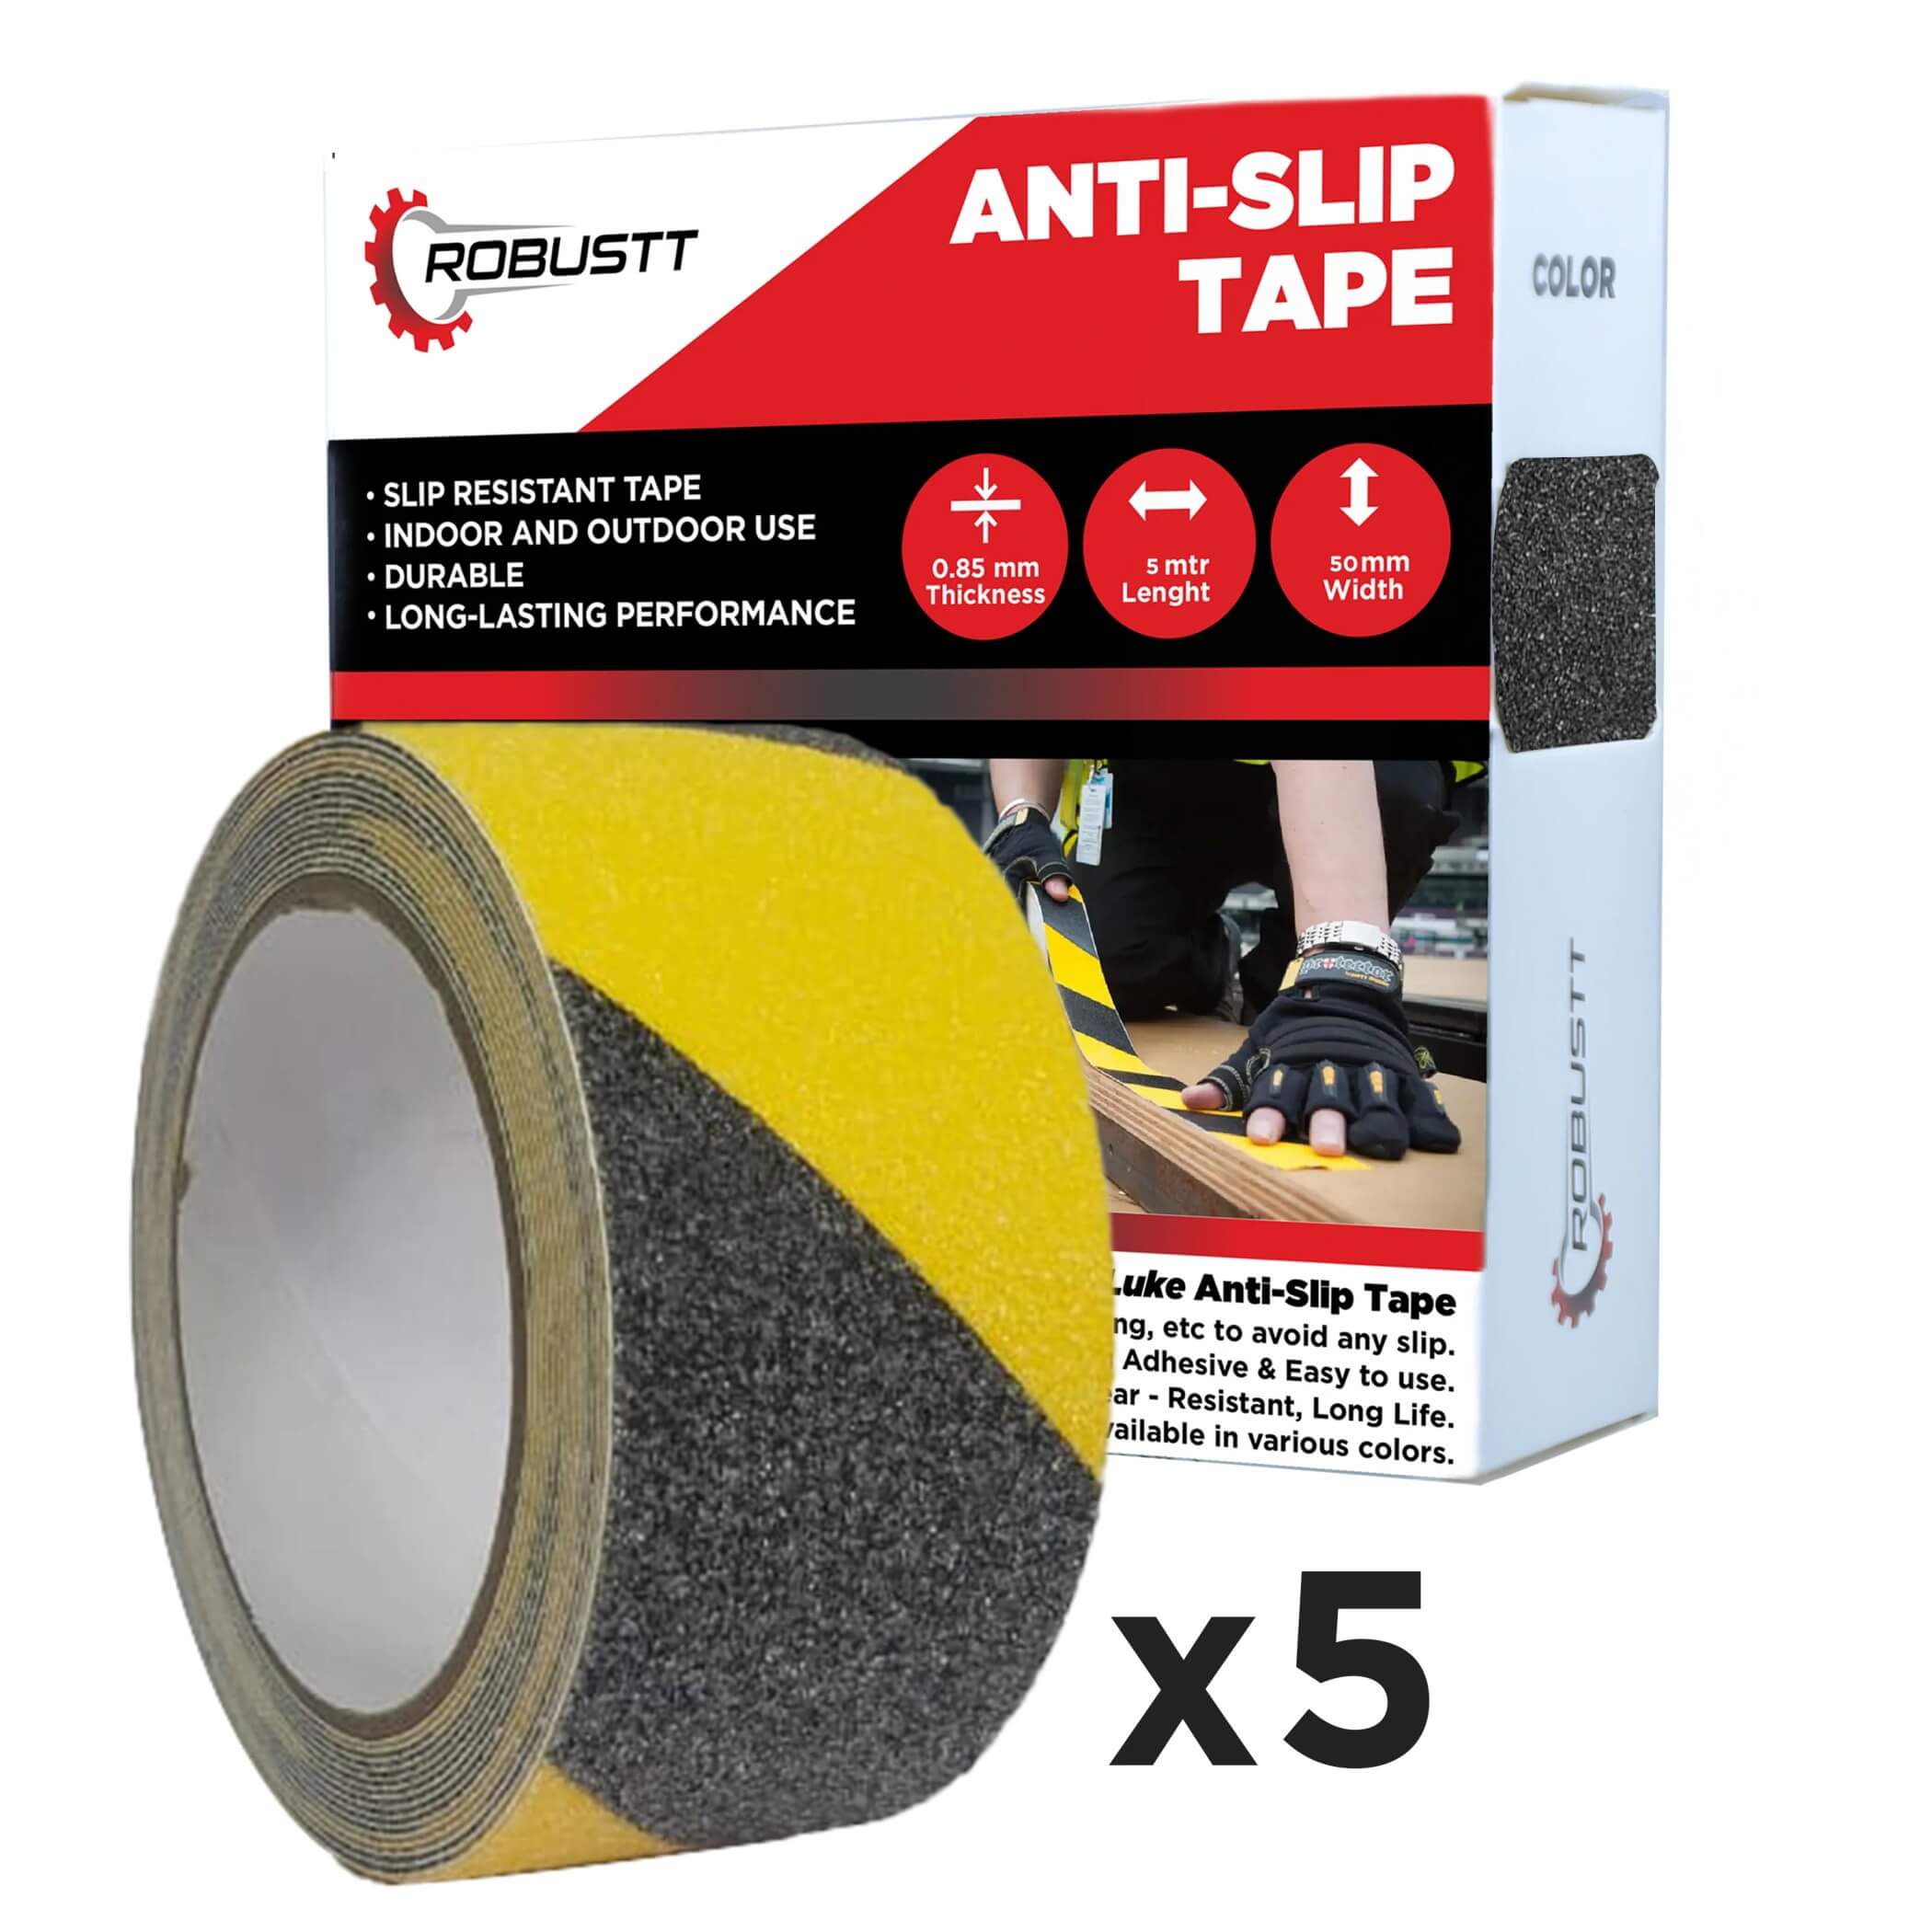 robustt-anti-skid-antislip-5mtr-guaranteed-x50mm-yellow-black-fall-resistant-with-pet-material-and-solvent-acrylic-adhesive-tape-pack-of-5